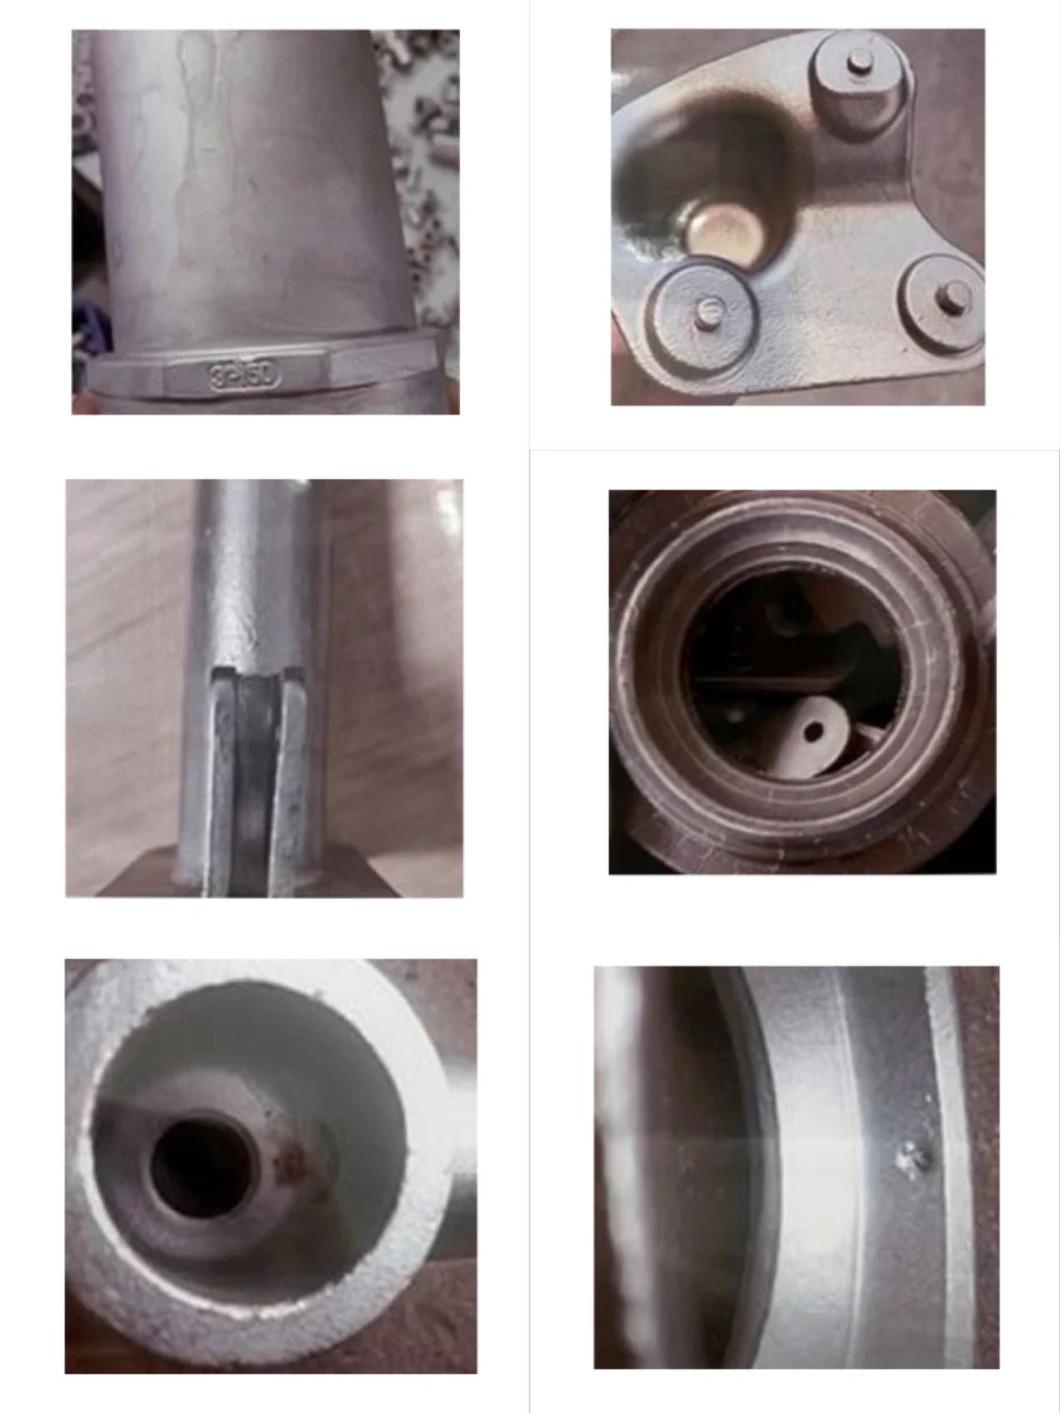 Drawings Customized Stainless Steel Pipe Fittings Lost Wax Casting Machinery Parts